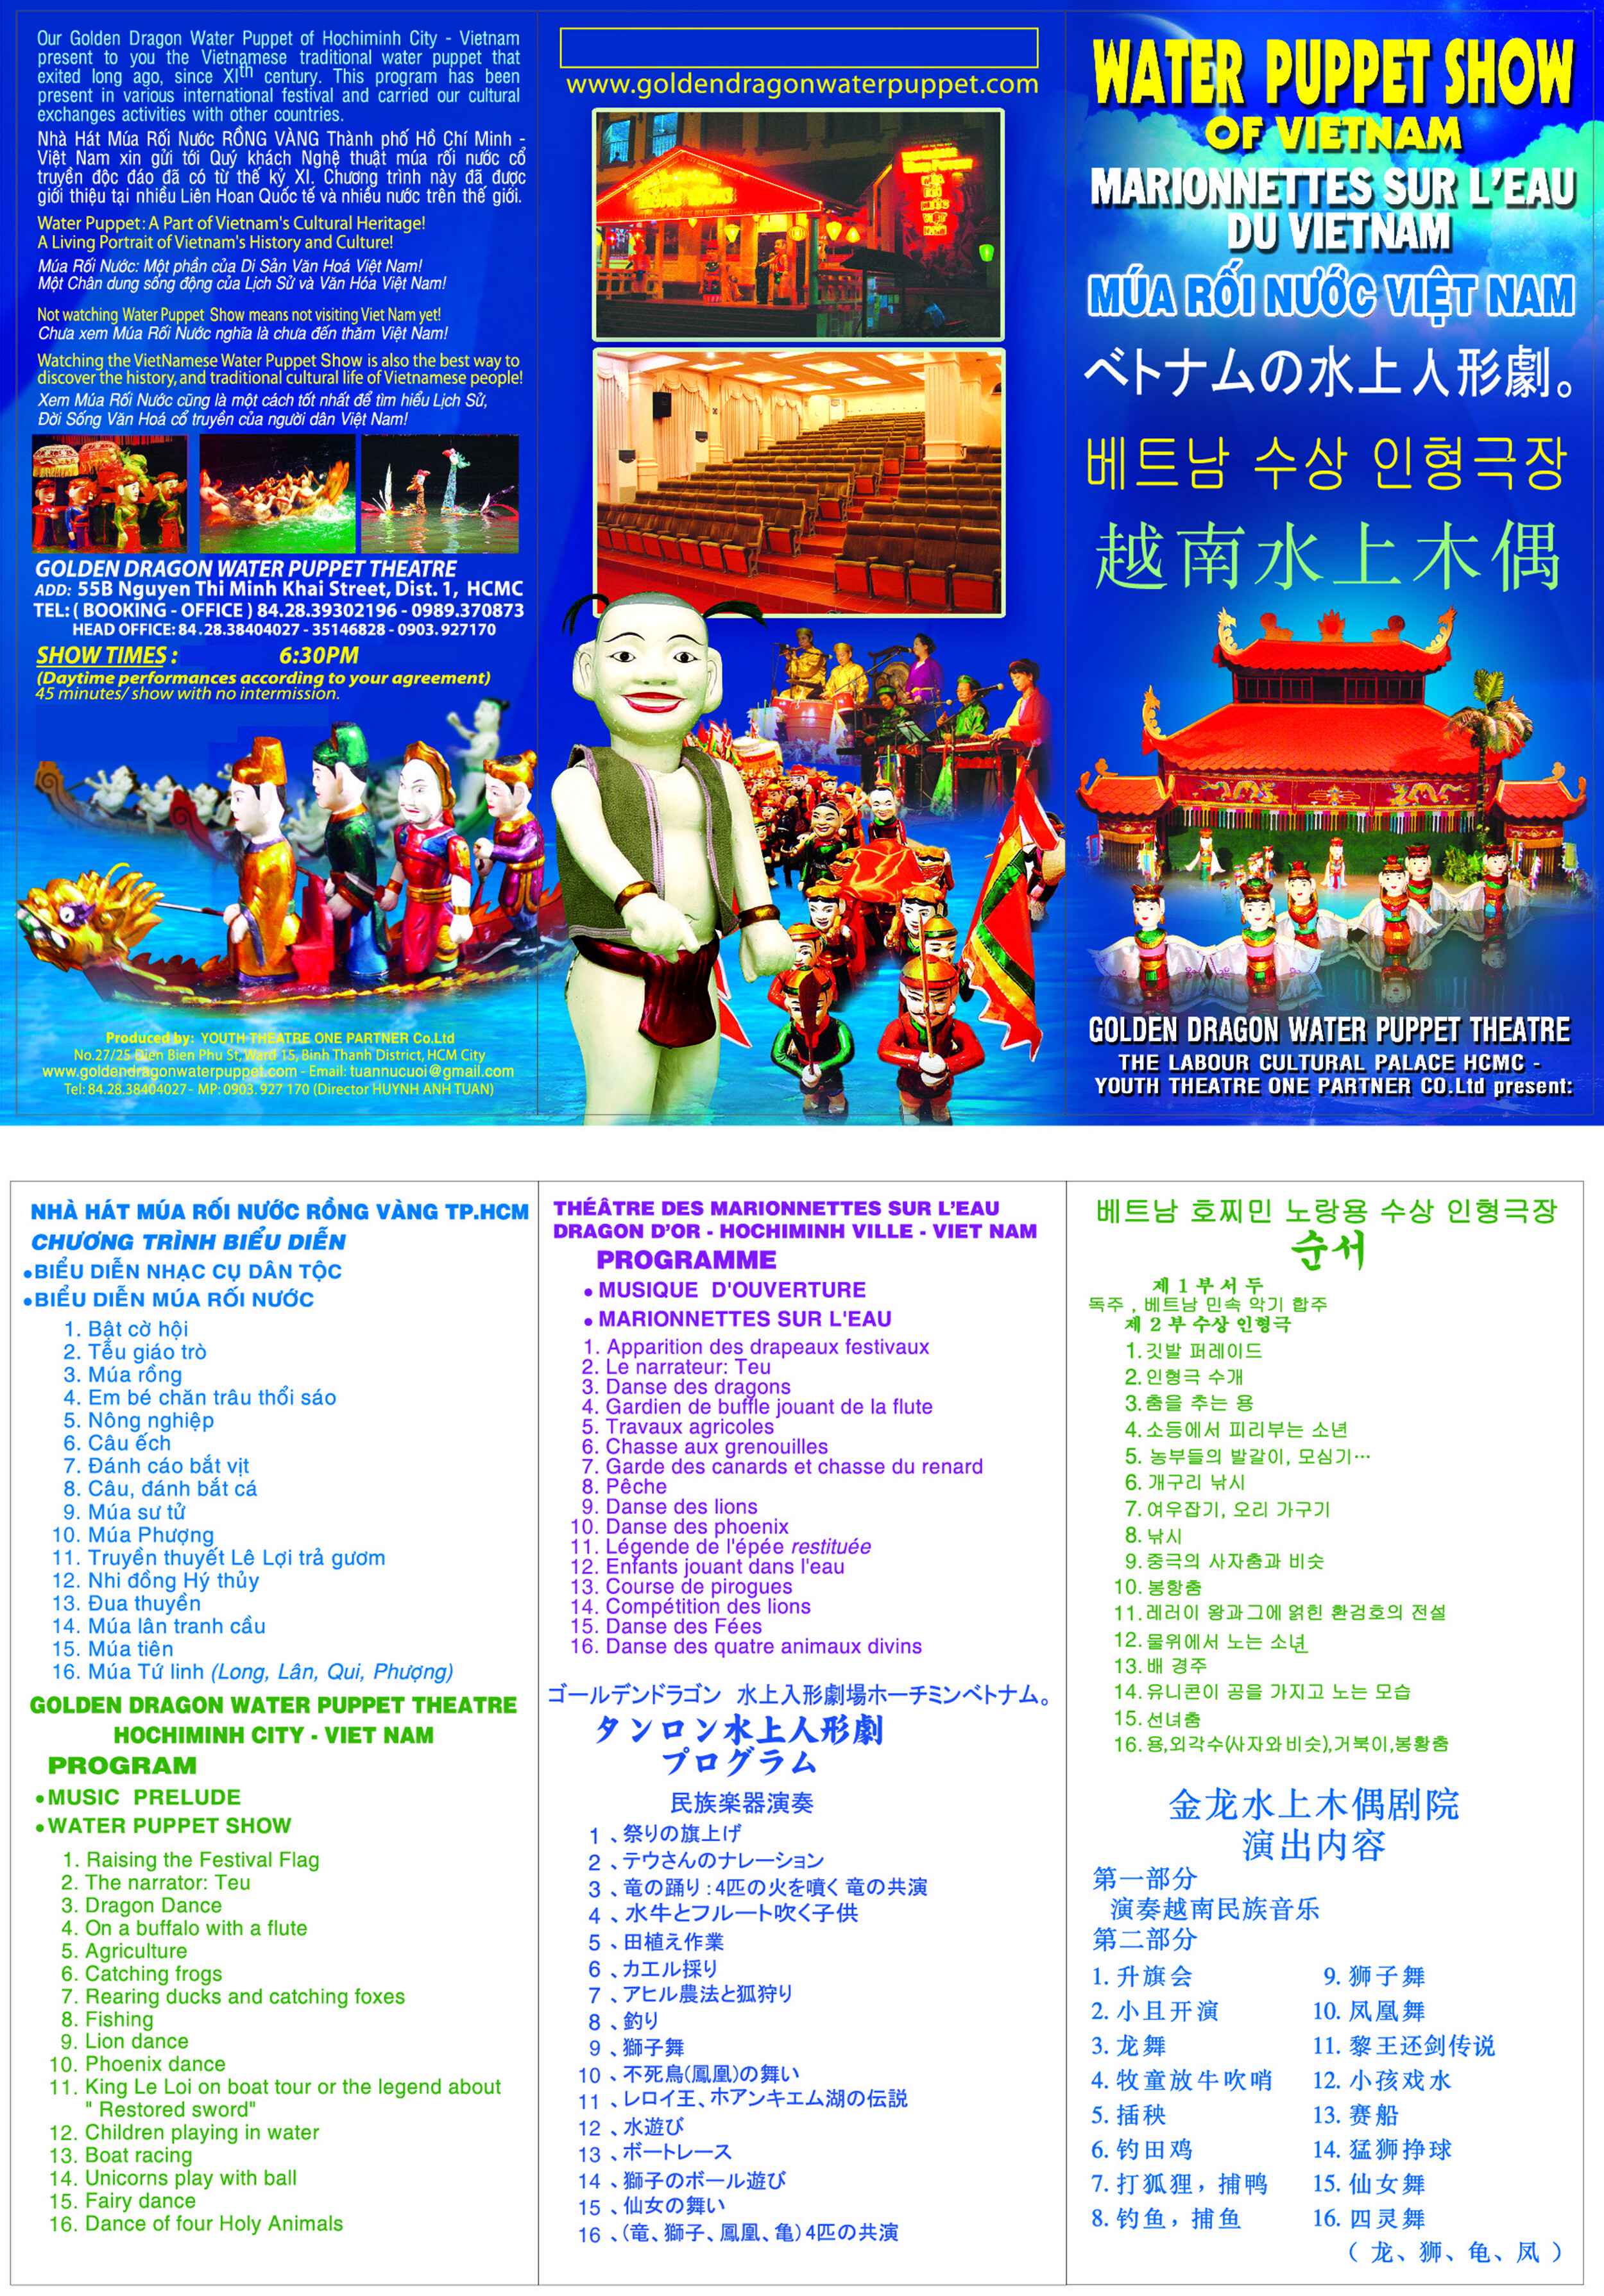 The “Traditional Water Puppet Show” | TicketBox 